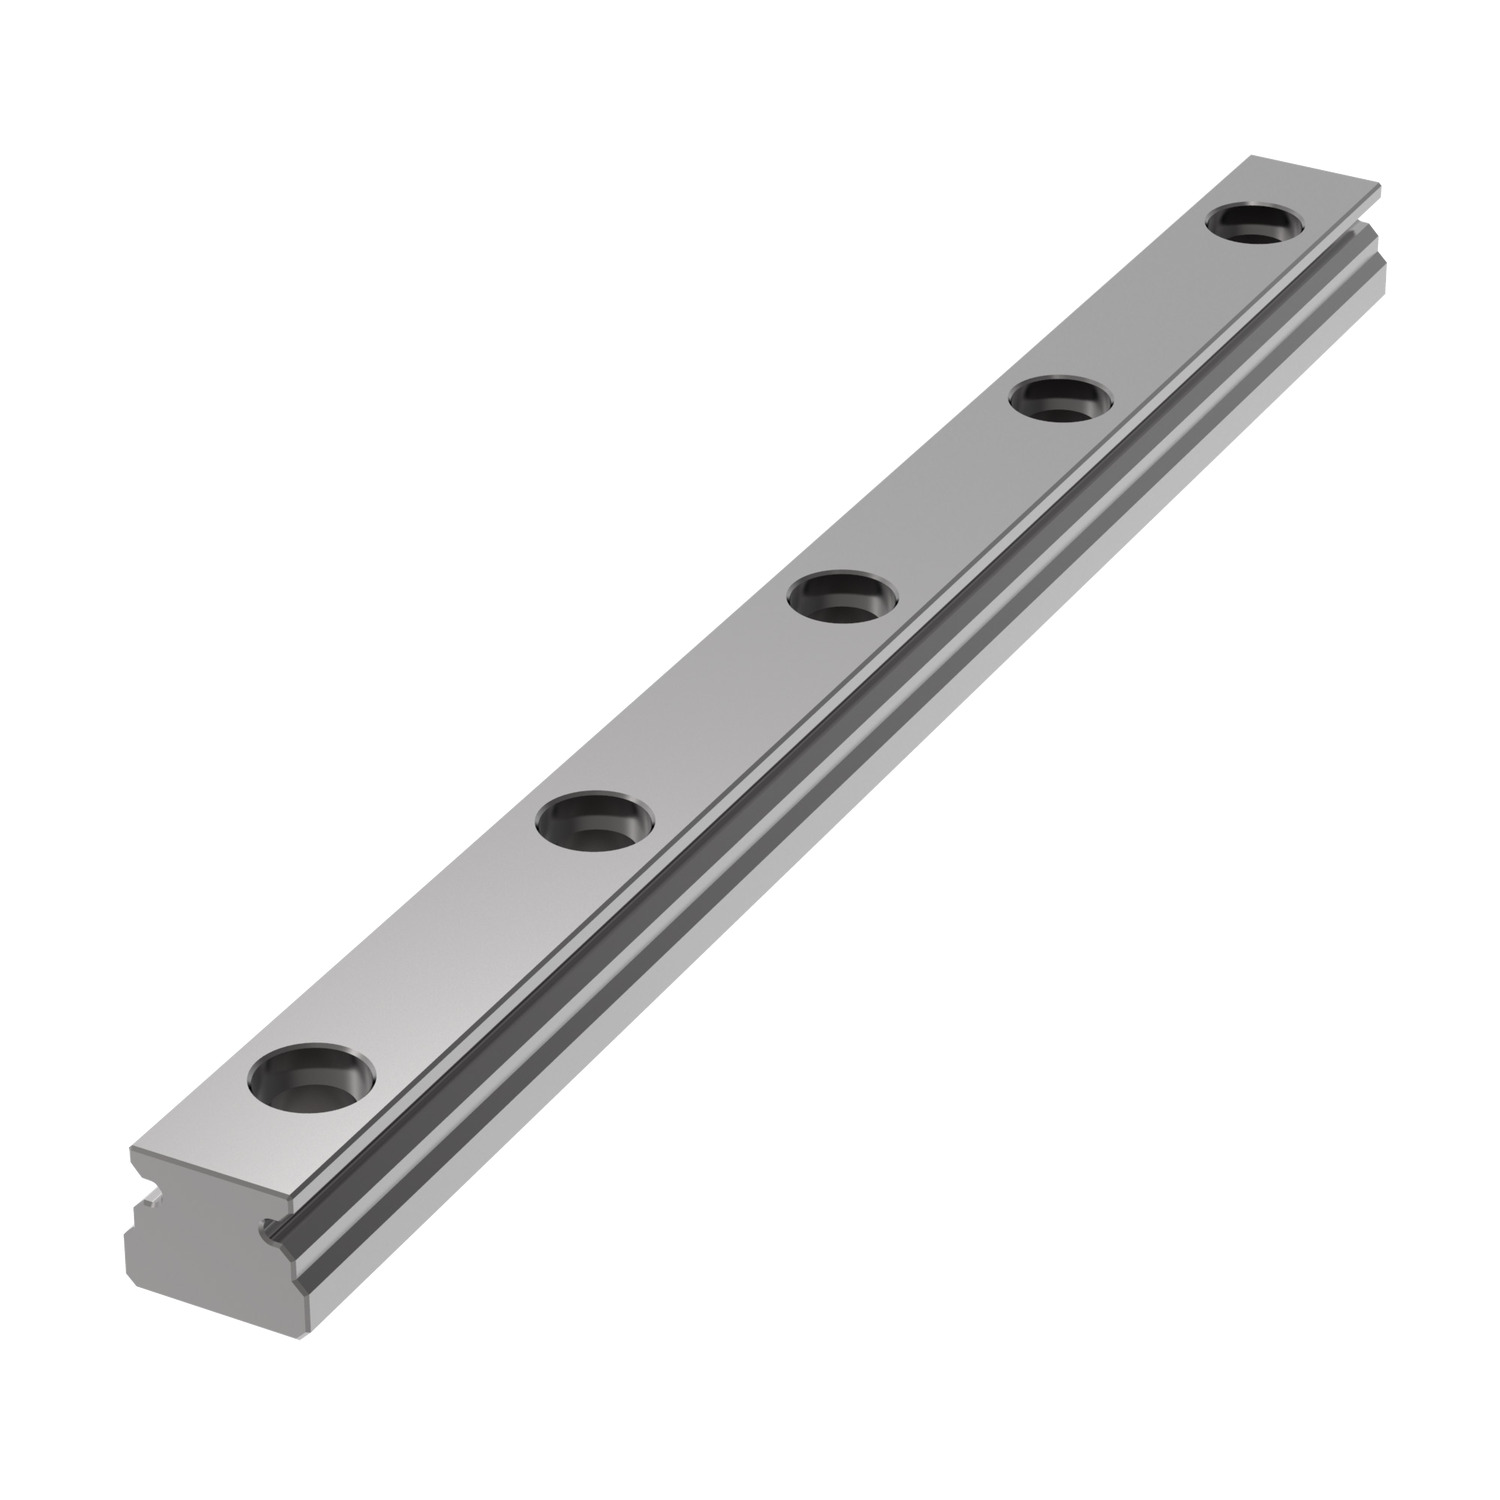 15mm Miniature Linear Rail Miniature linear rails ideal for space efficient applications. Corrosion resistant hardened stainless steel.